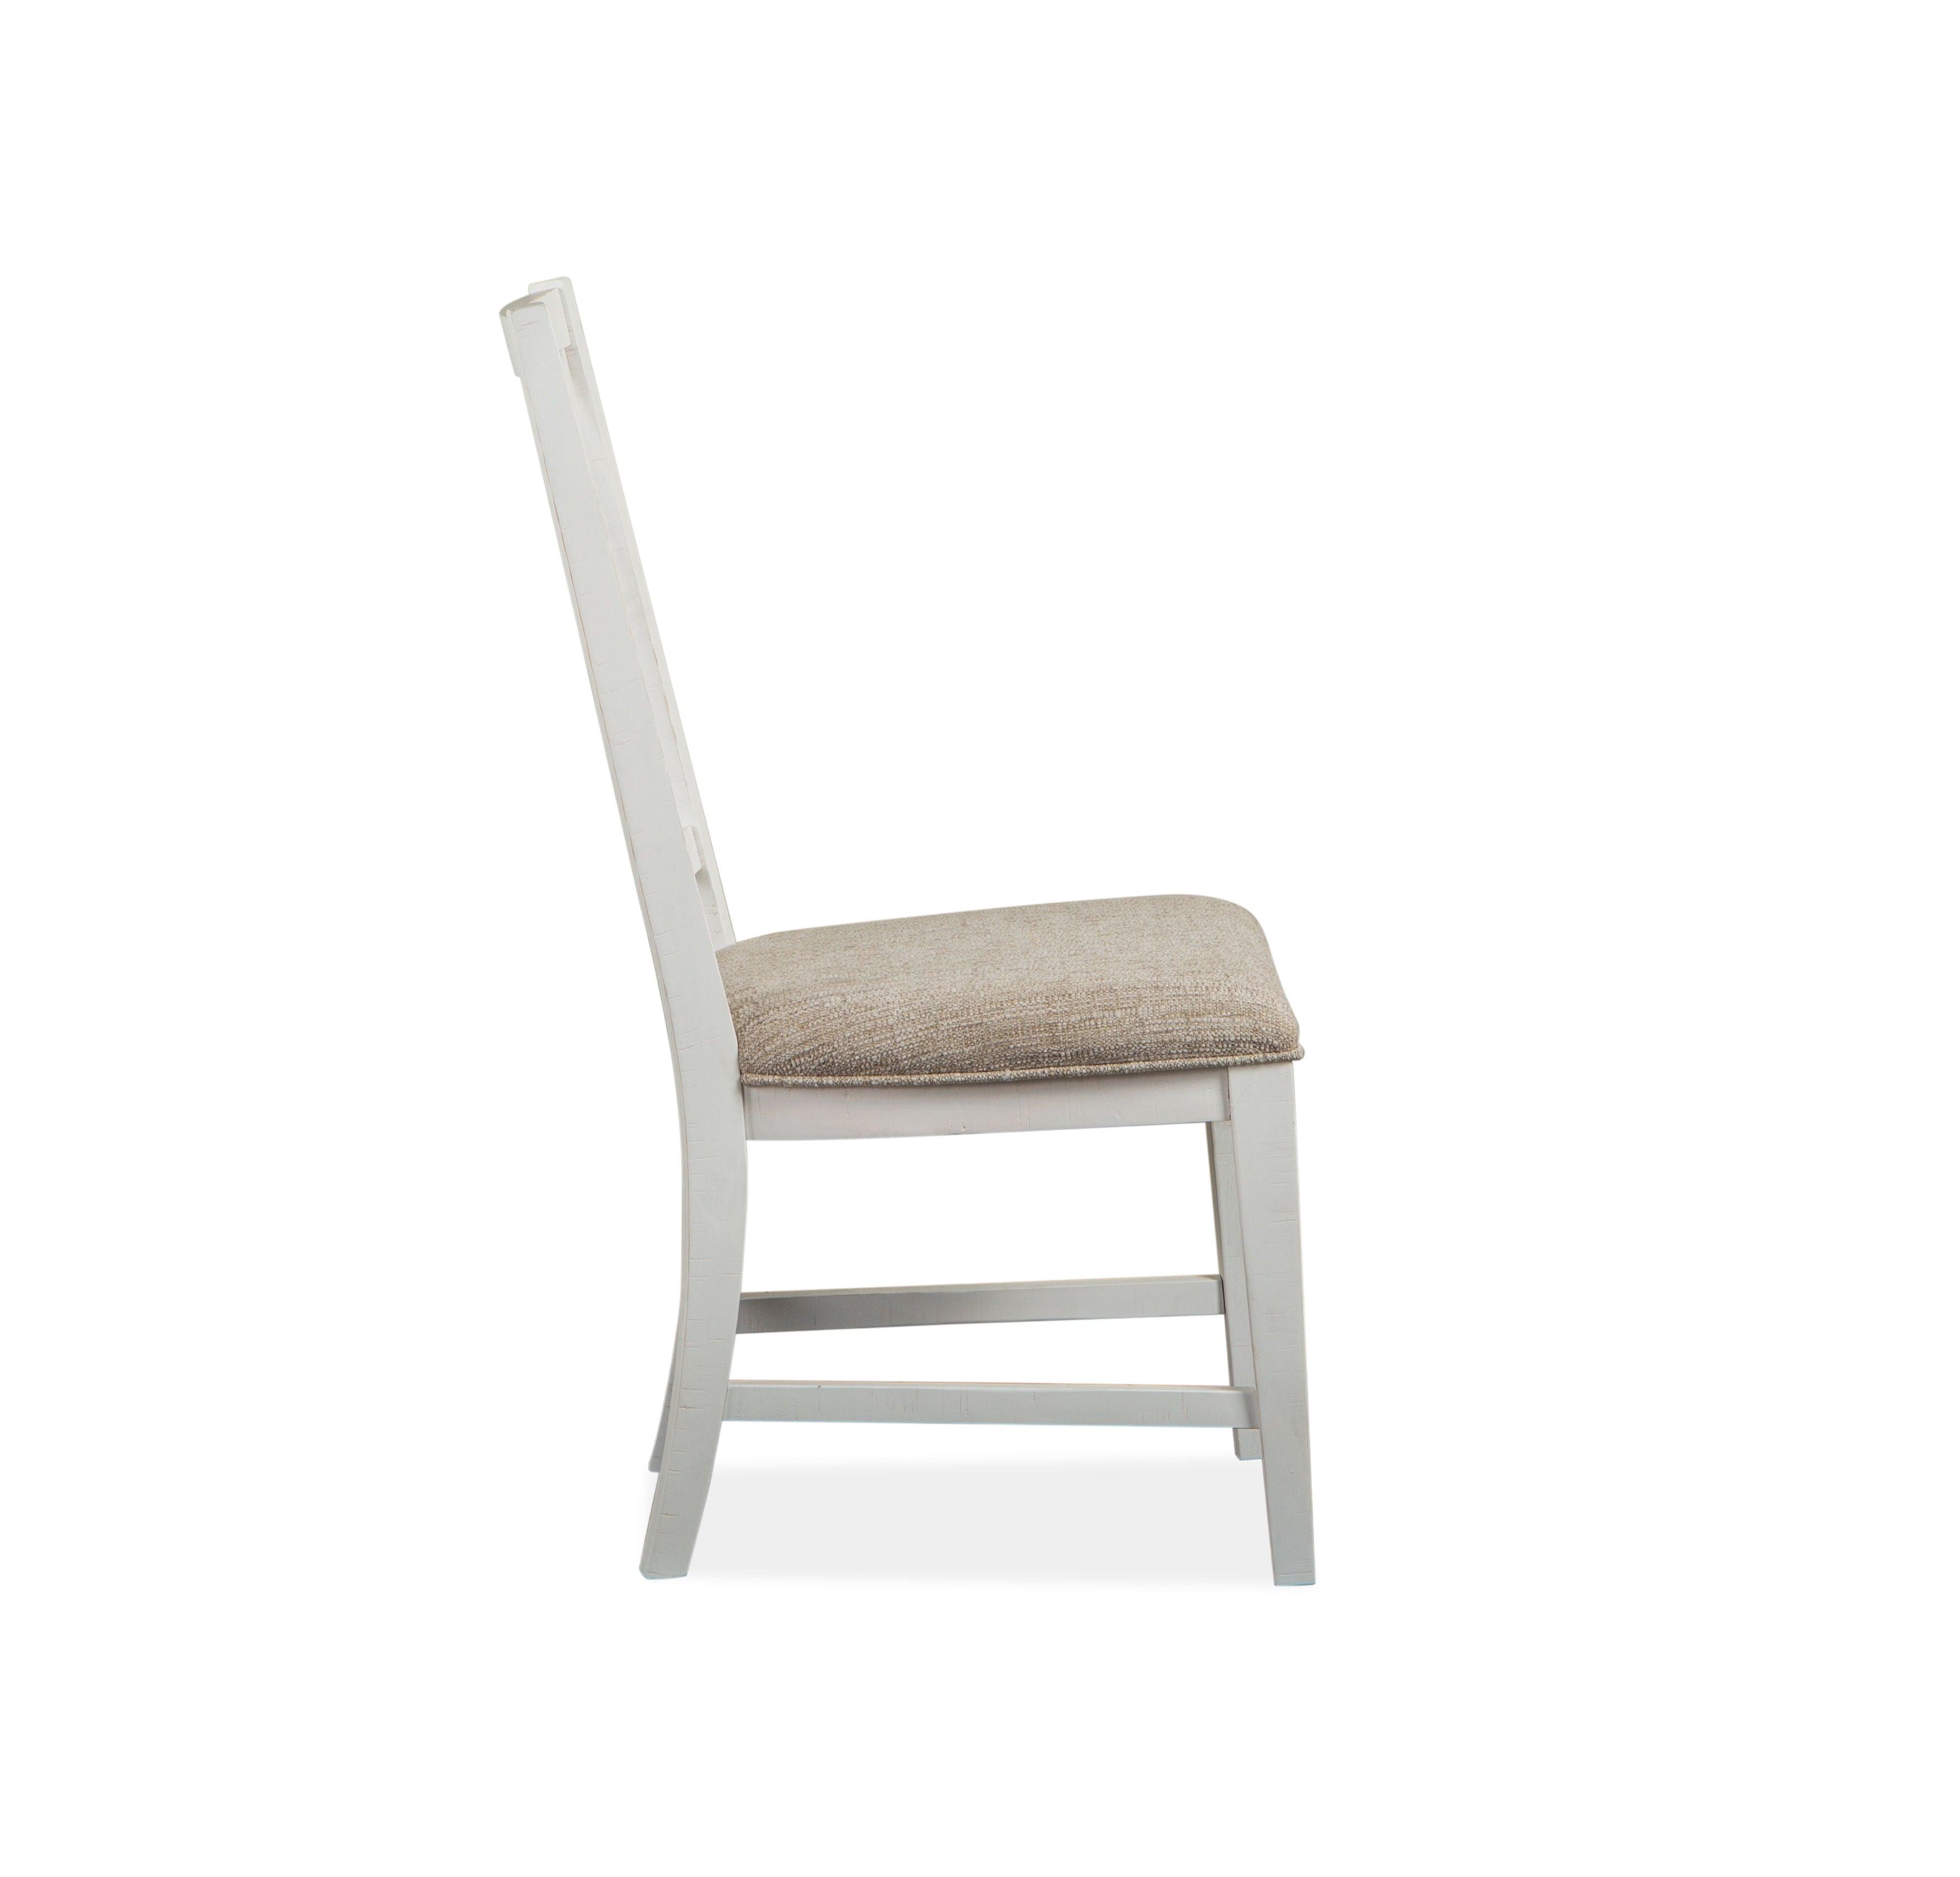 Magnussen Furniture - Heron Cove - Dining Side Chair With Upholstered Seat (Set of 2) - Chalk White - 5th Avenue Furniture